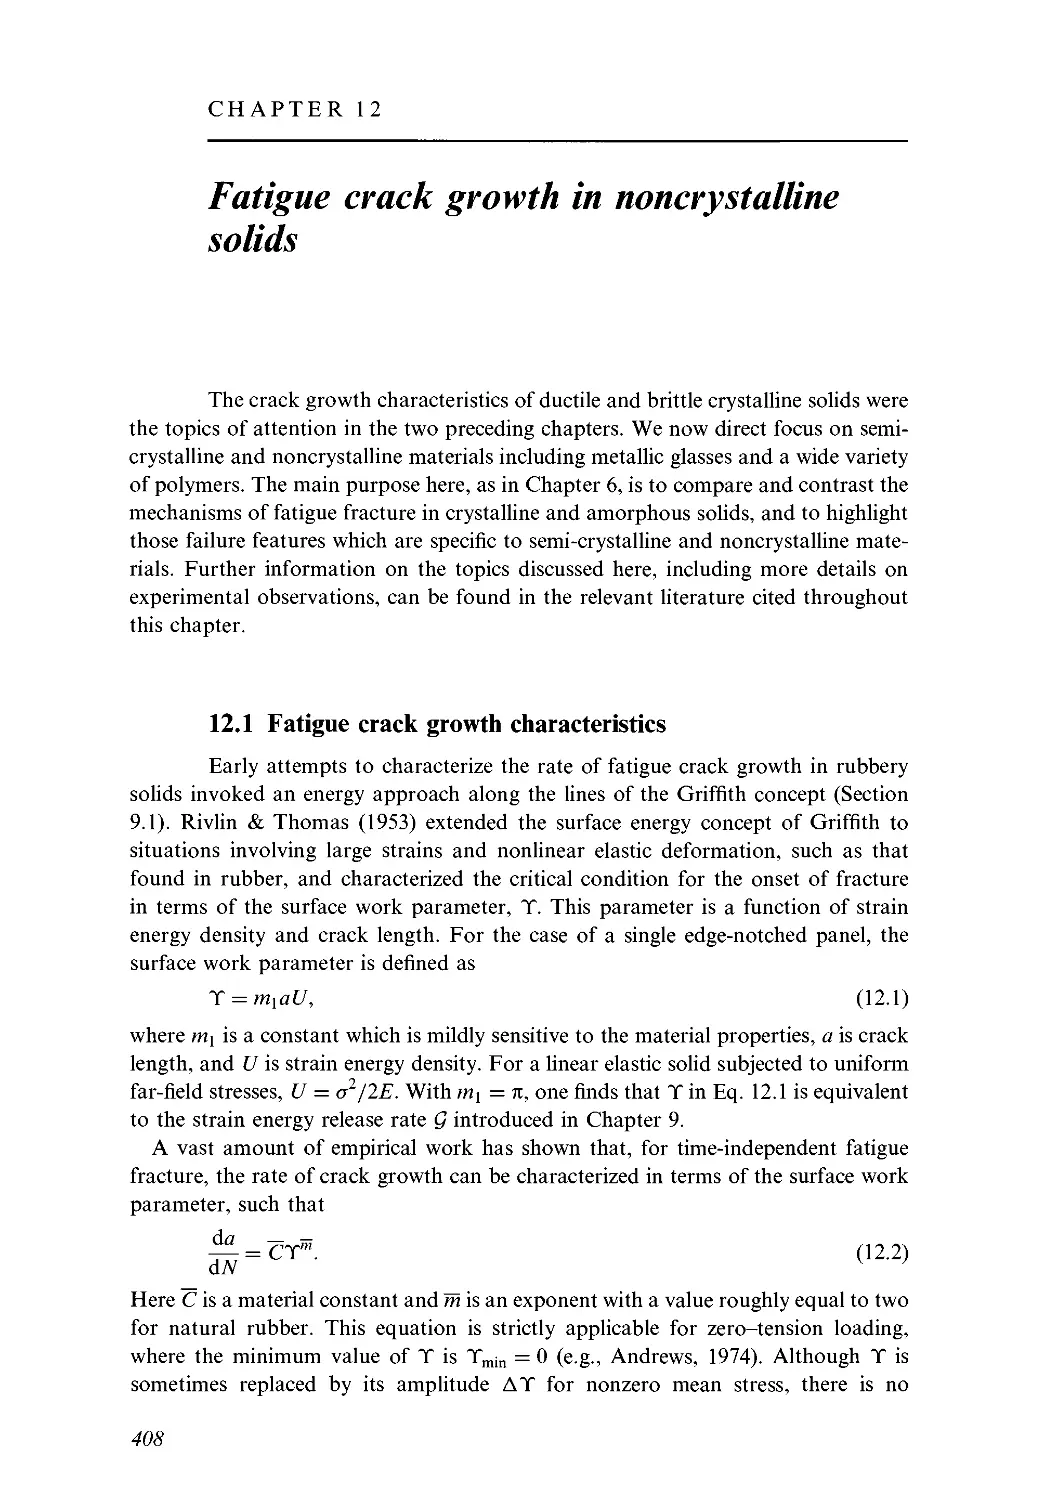 12 - Fatigue crack growth in noncrystalline solids